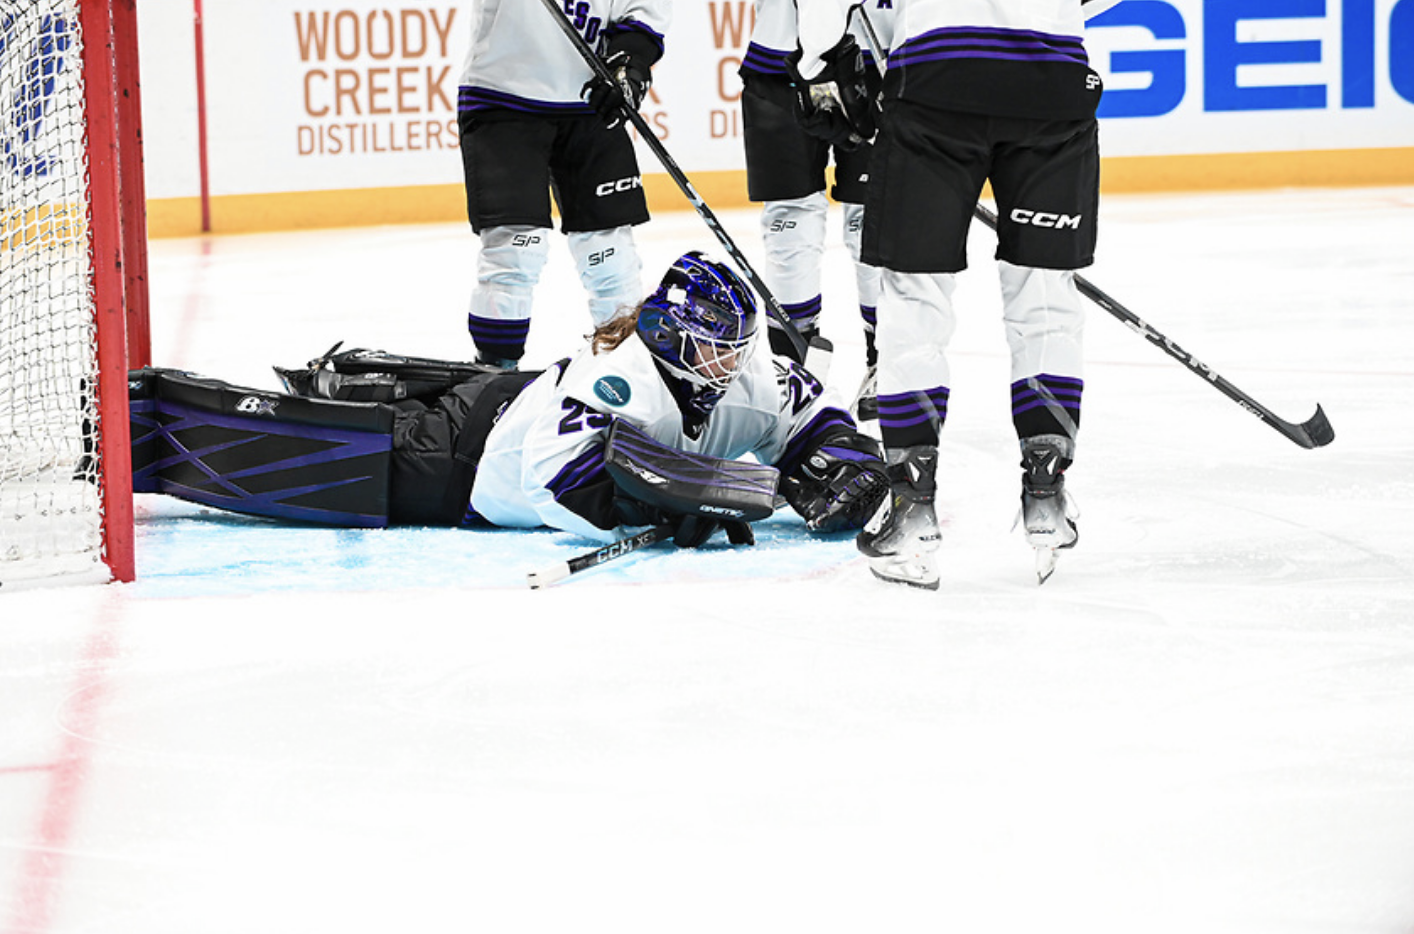 Hensley lays almost flat on her stomach in her crease after making a save. Three of her teammates stand around her, only visible from the waist down. They are all wearing white away uniforms.